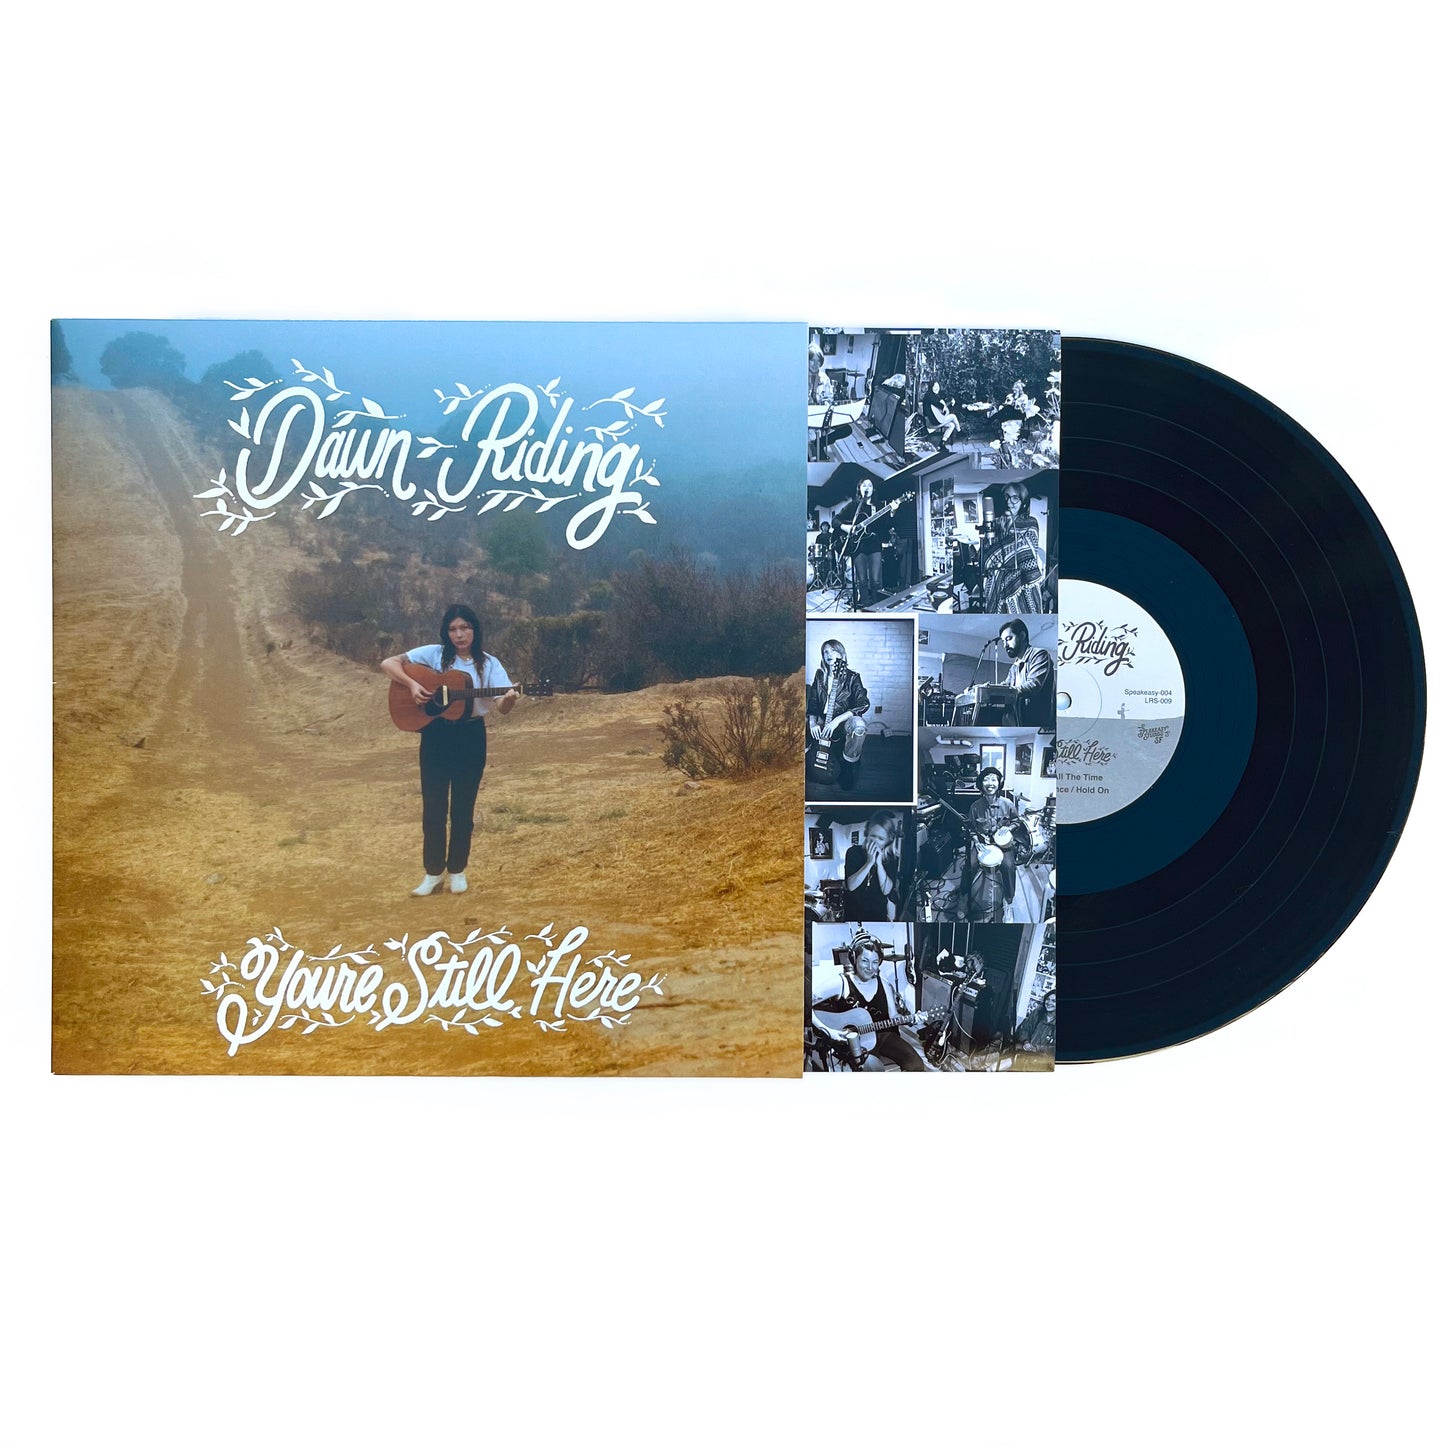 "You're Still Here" by Dawn Riding - Limited Edition First Pressing Black Vinyl LP